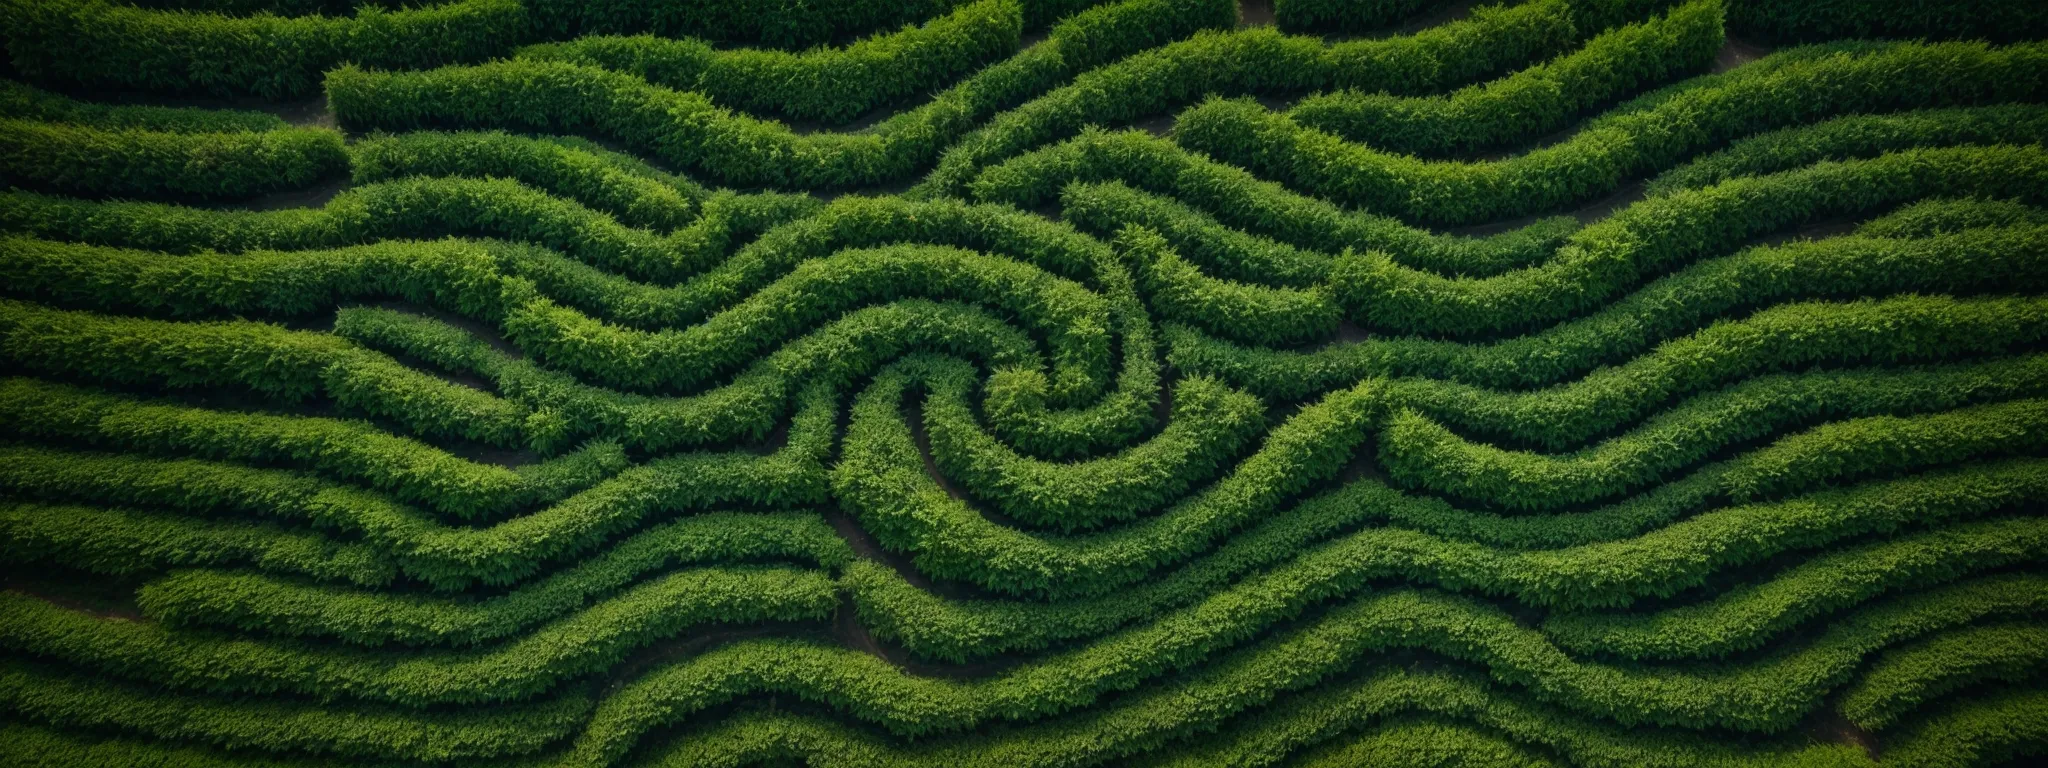 a top view of a flourishing green plant growing amidst a maze, representing strategic progress in a complex environment.